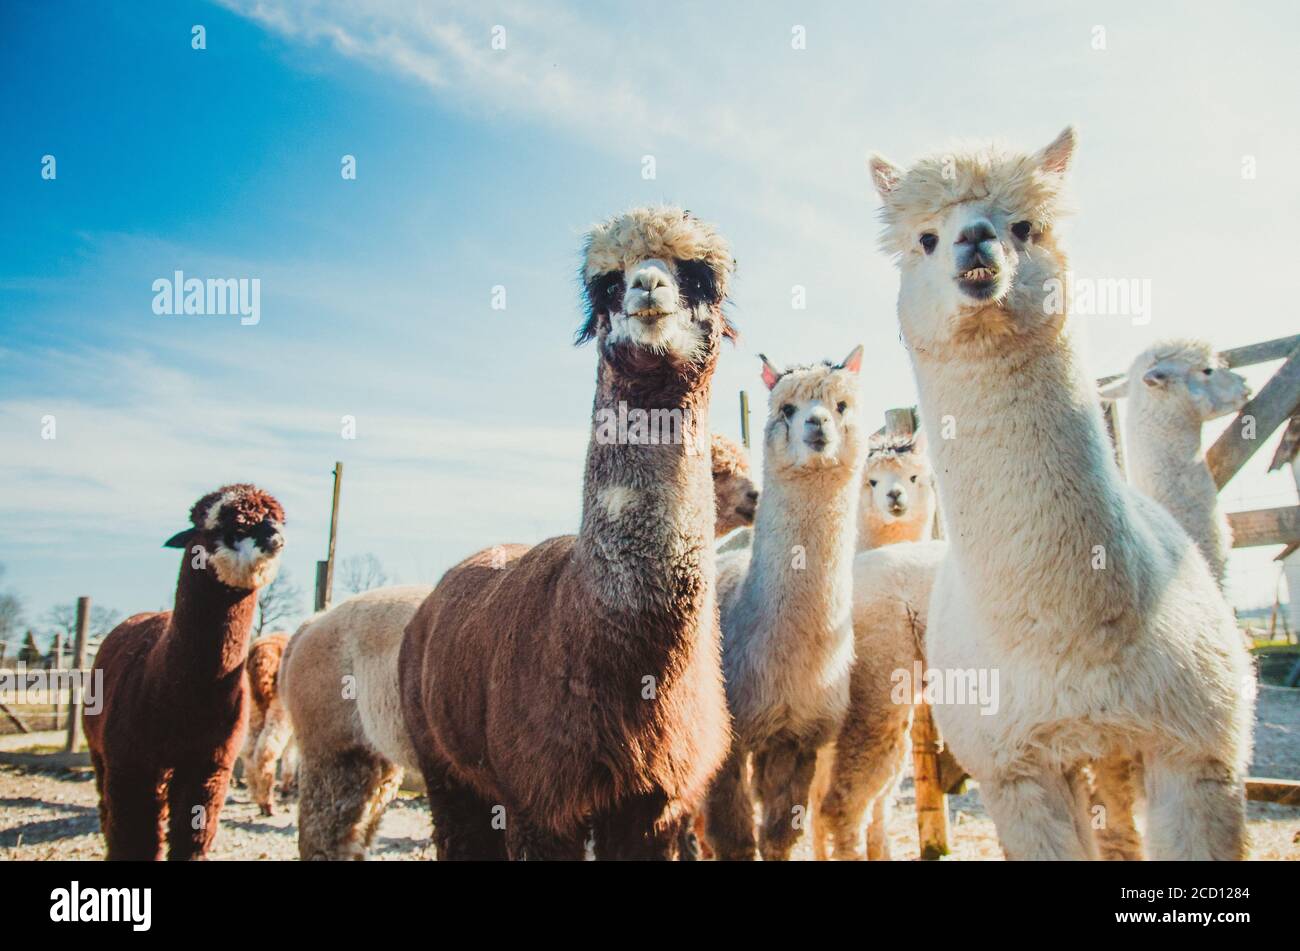 Group Of Cute Alpacas In Outside Looking At Camera Stock Photo Alamy